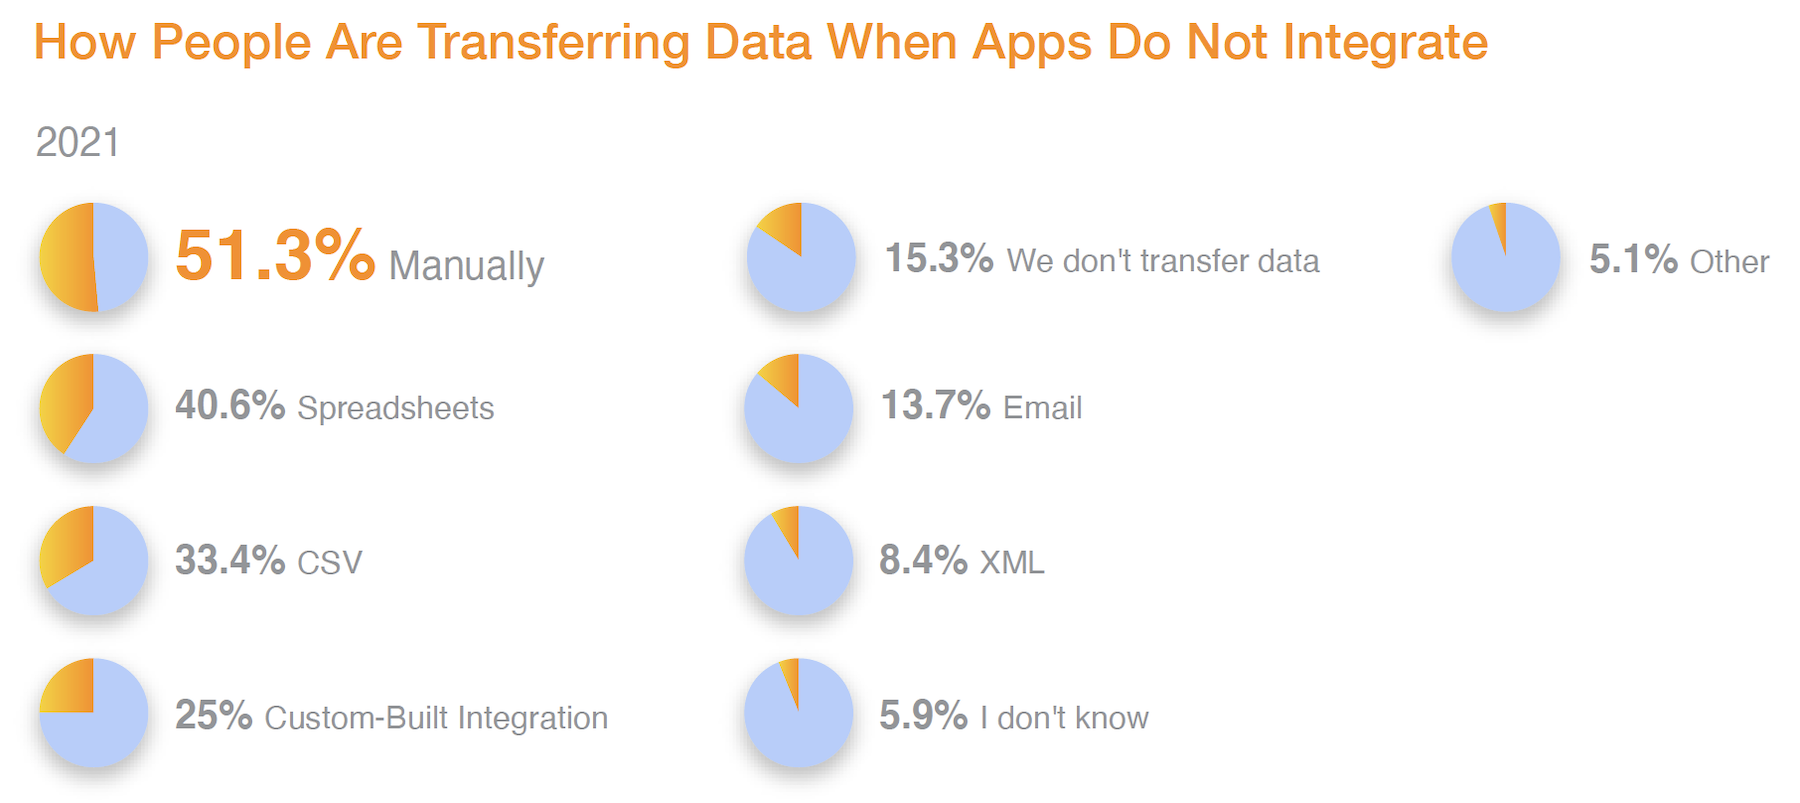 While mobile apps are widely used, transferring data between them is a challenge.